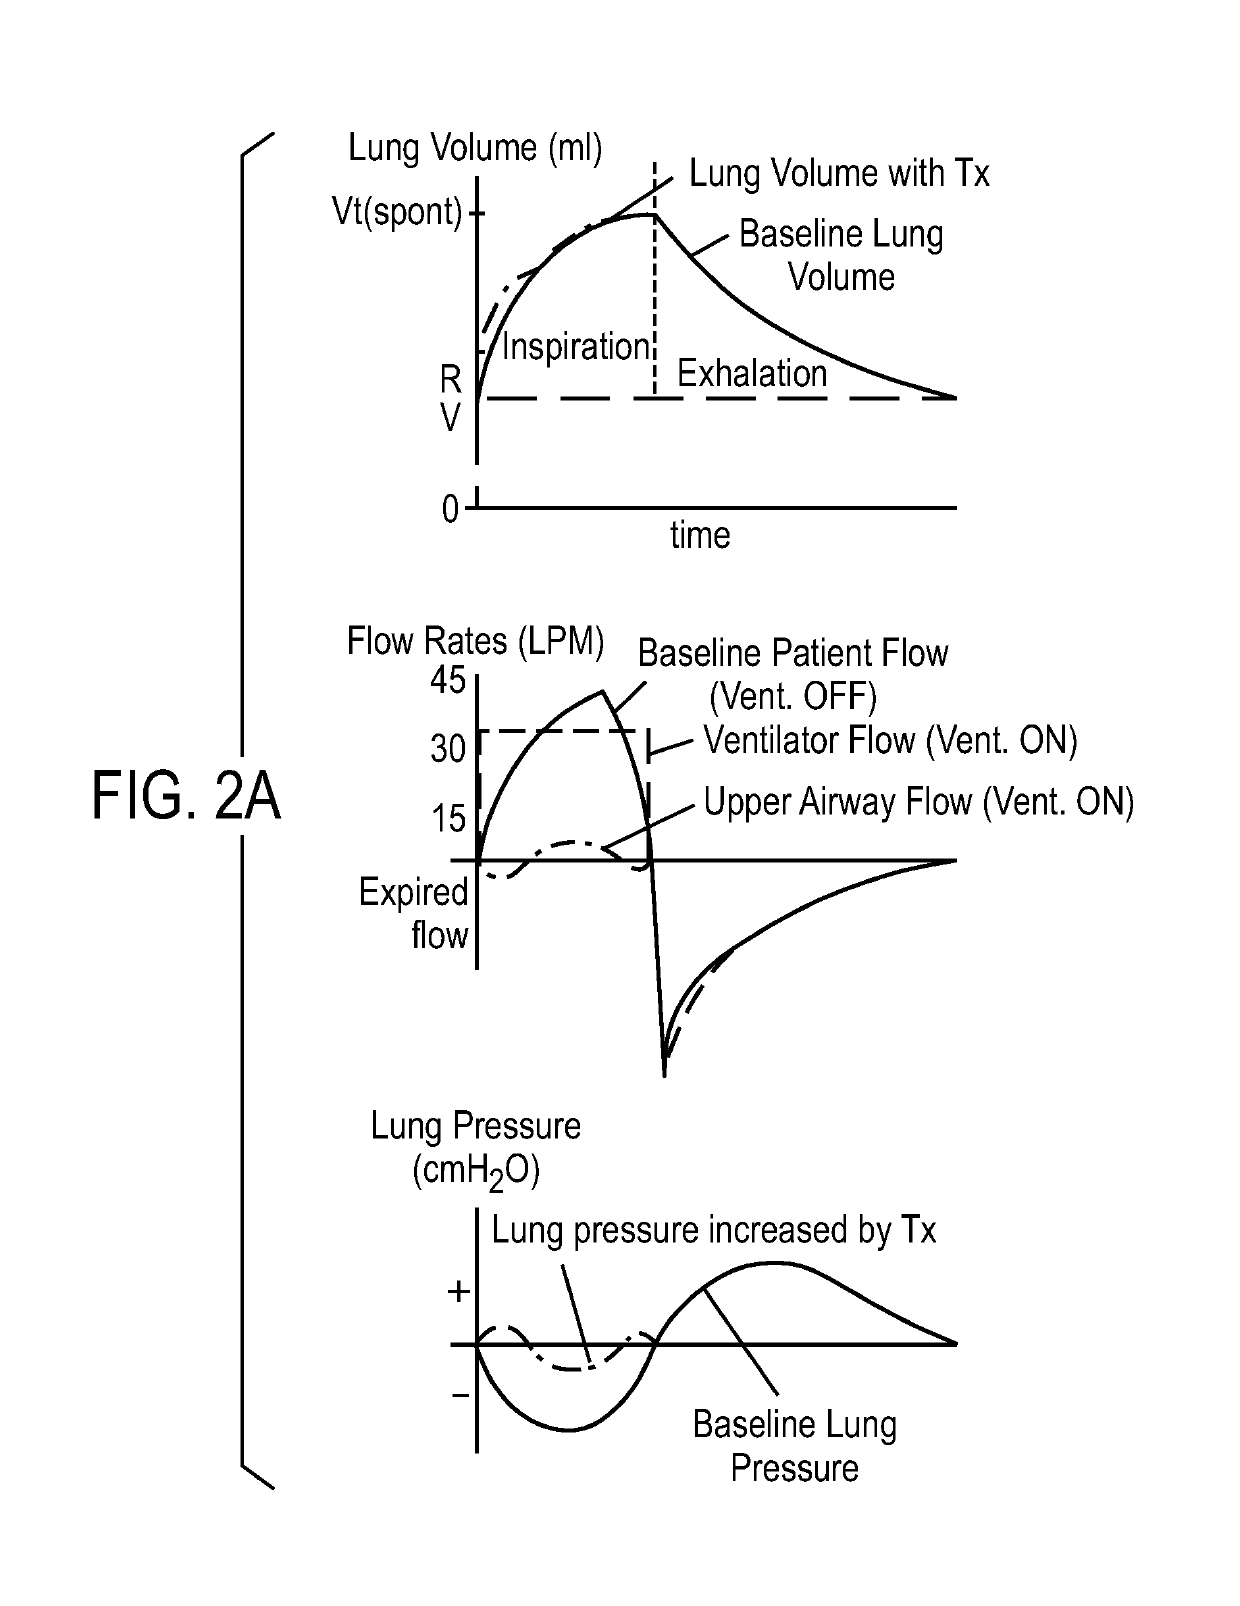 Ventilator with biofeedback monitoring and control for improving patient activity and health